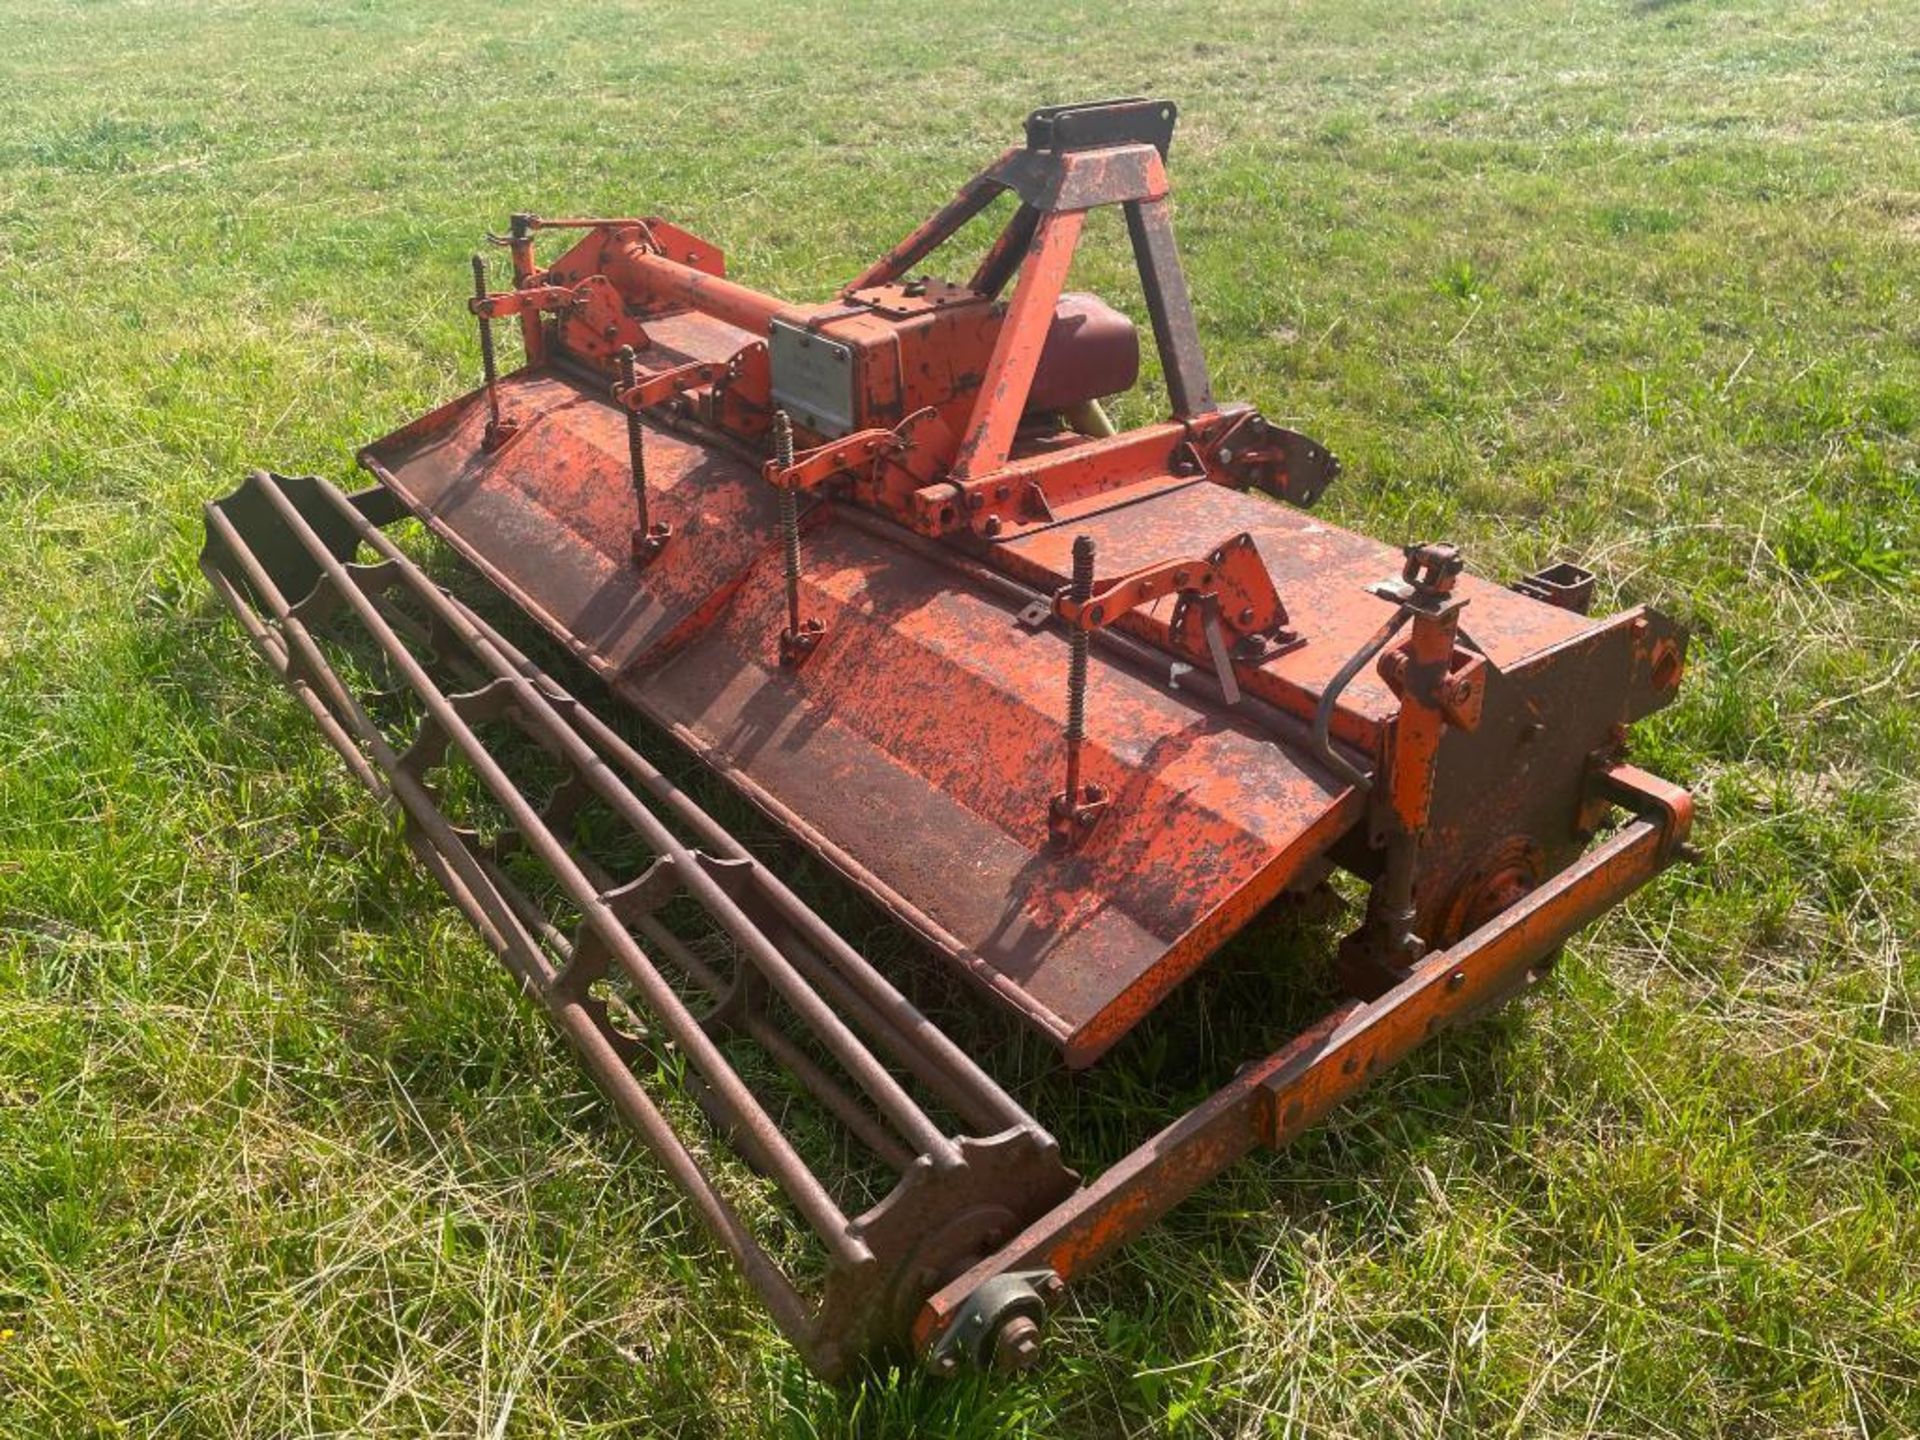 Howard HB100 8' 9" rotavator with rear crumbler, PTO driven, linkage mounted. Serial No: 802A4581 ​​ - Image 5 of 10